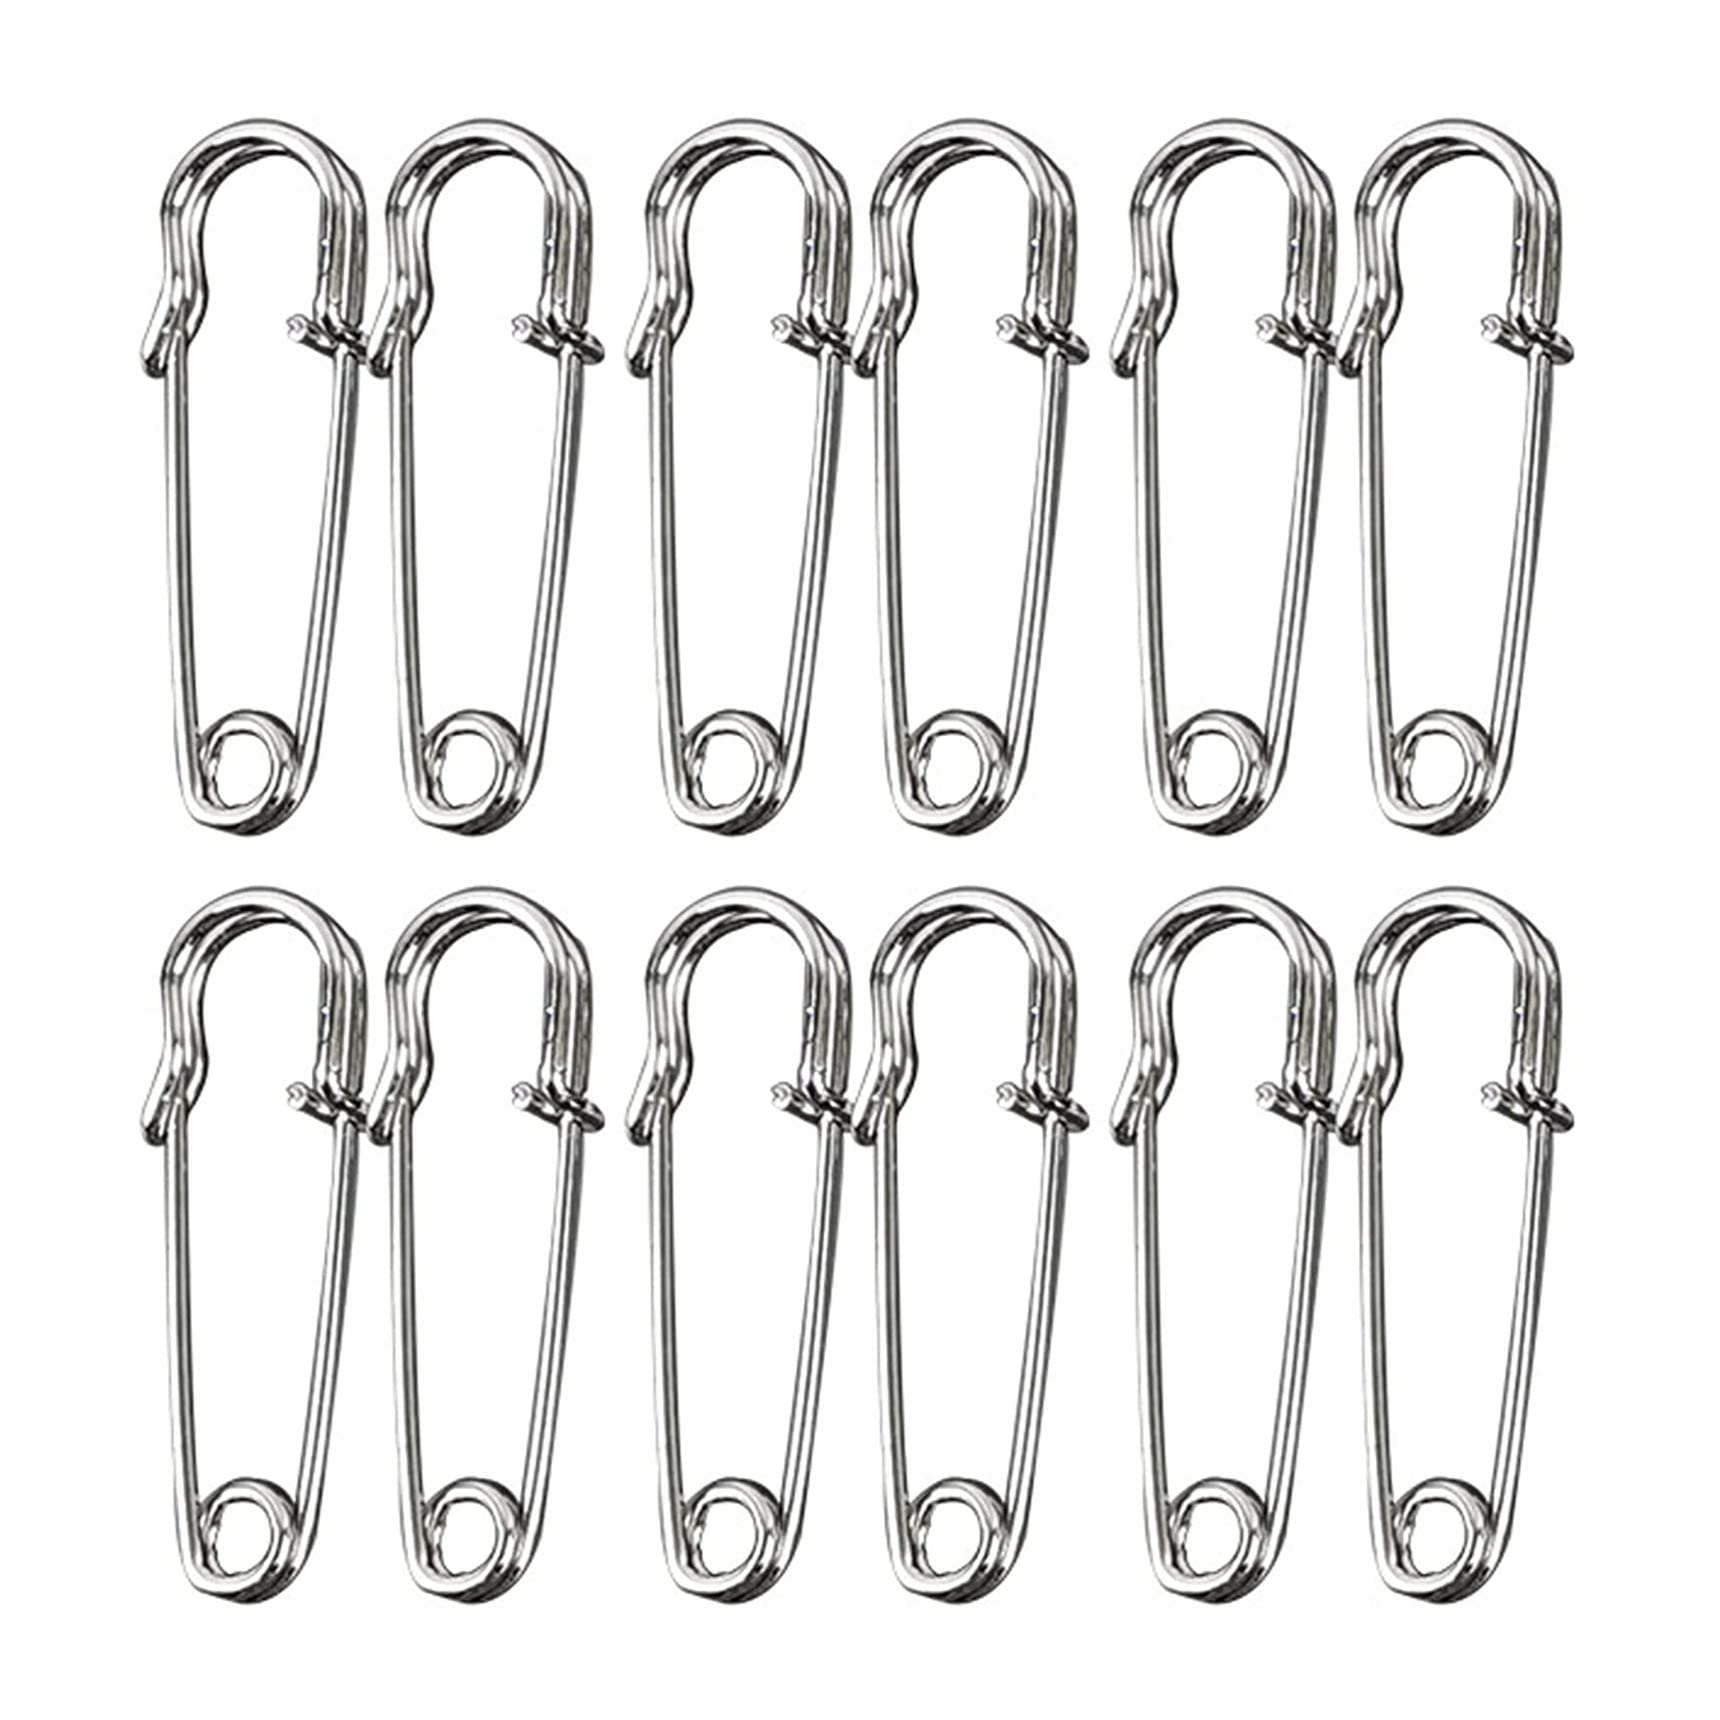 60pcs Large Safety Pins 2.75 Silver Spring Lock Pins Big Safety Pins Heavy  Duty for Fashion, Sewing, Quilting, Blankets, Upholstery, Laundry and